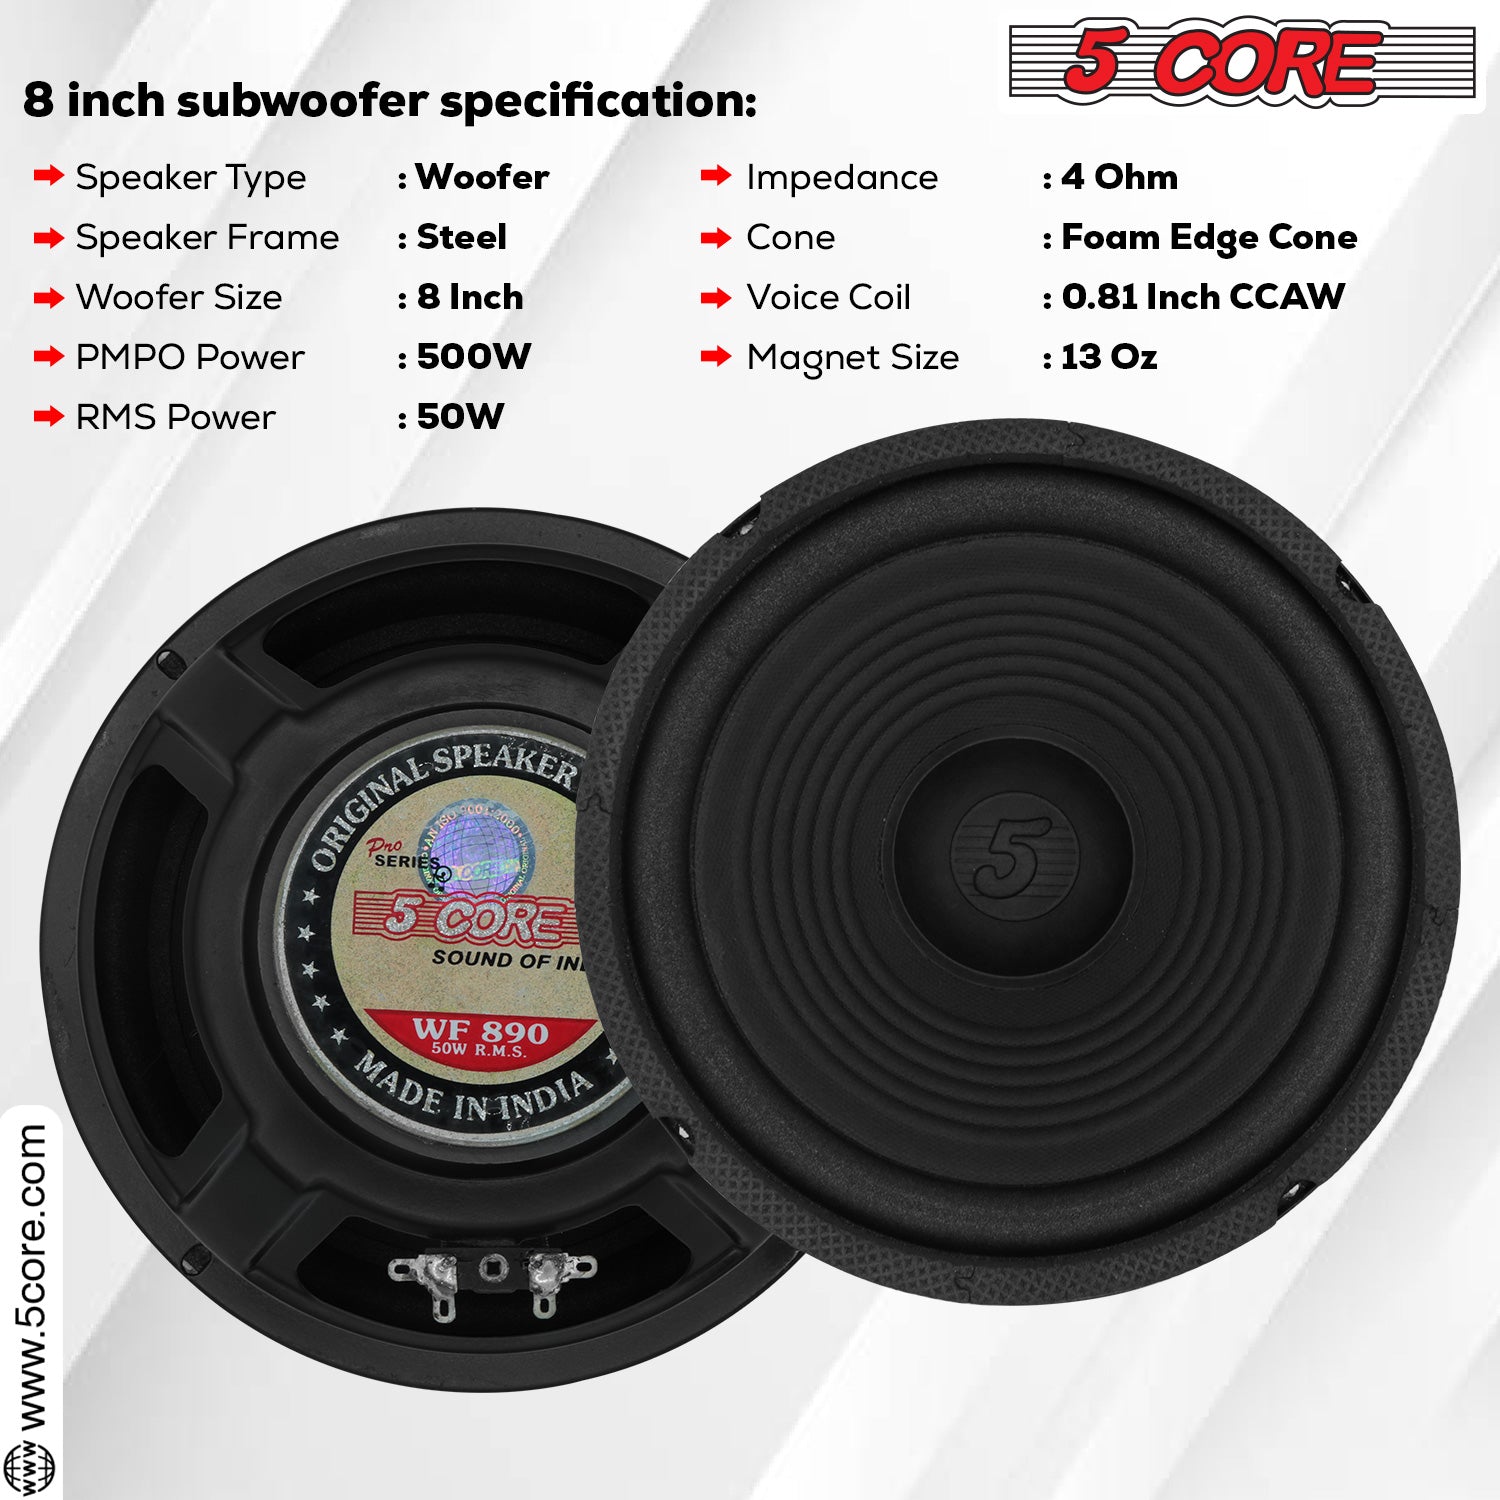 Specification of 8 Inch Subwoofer